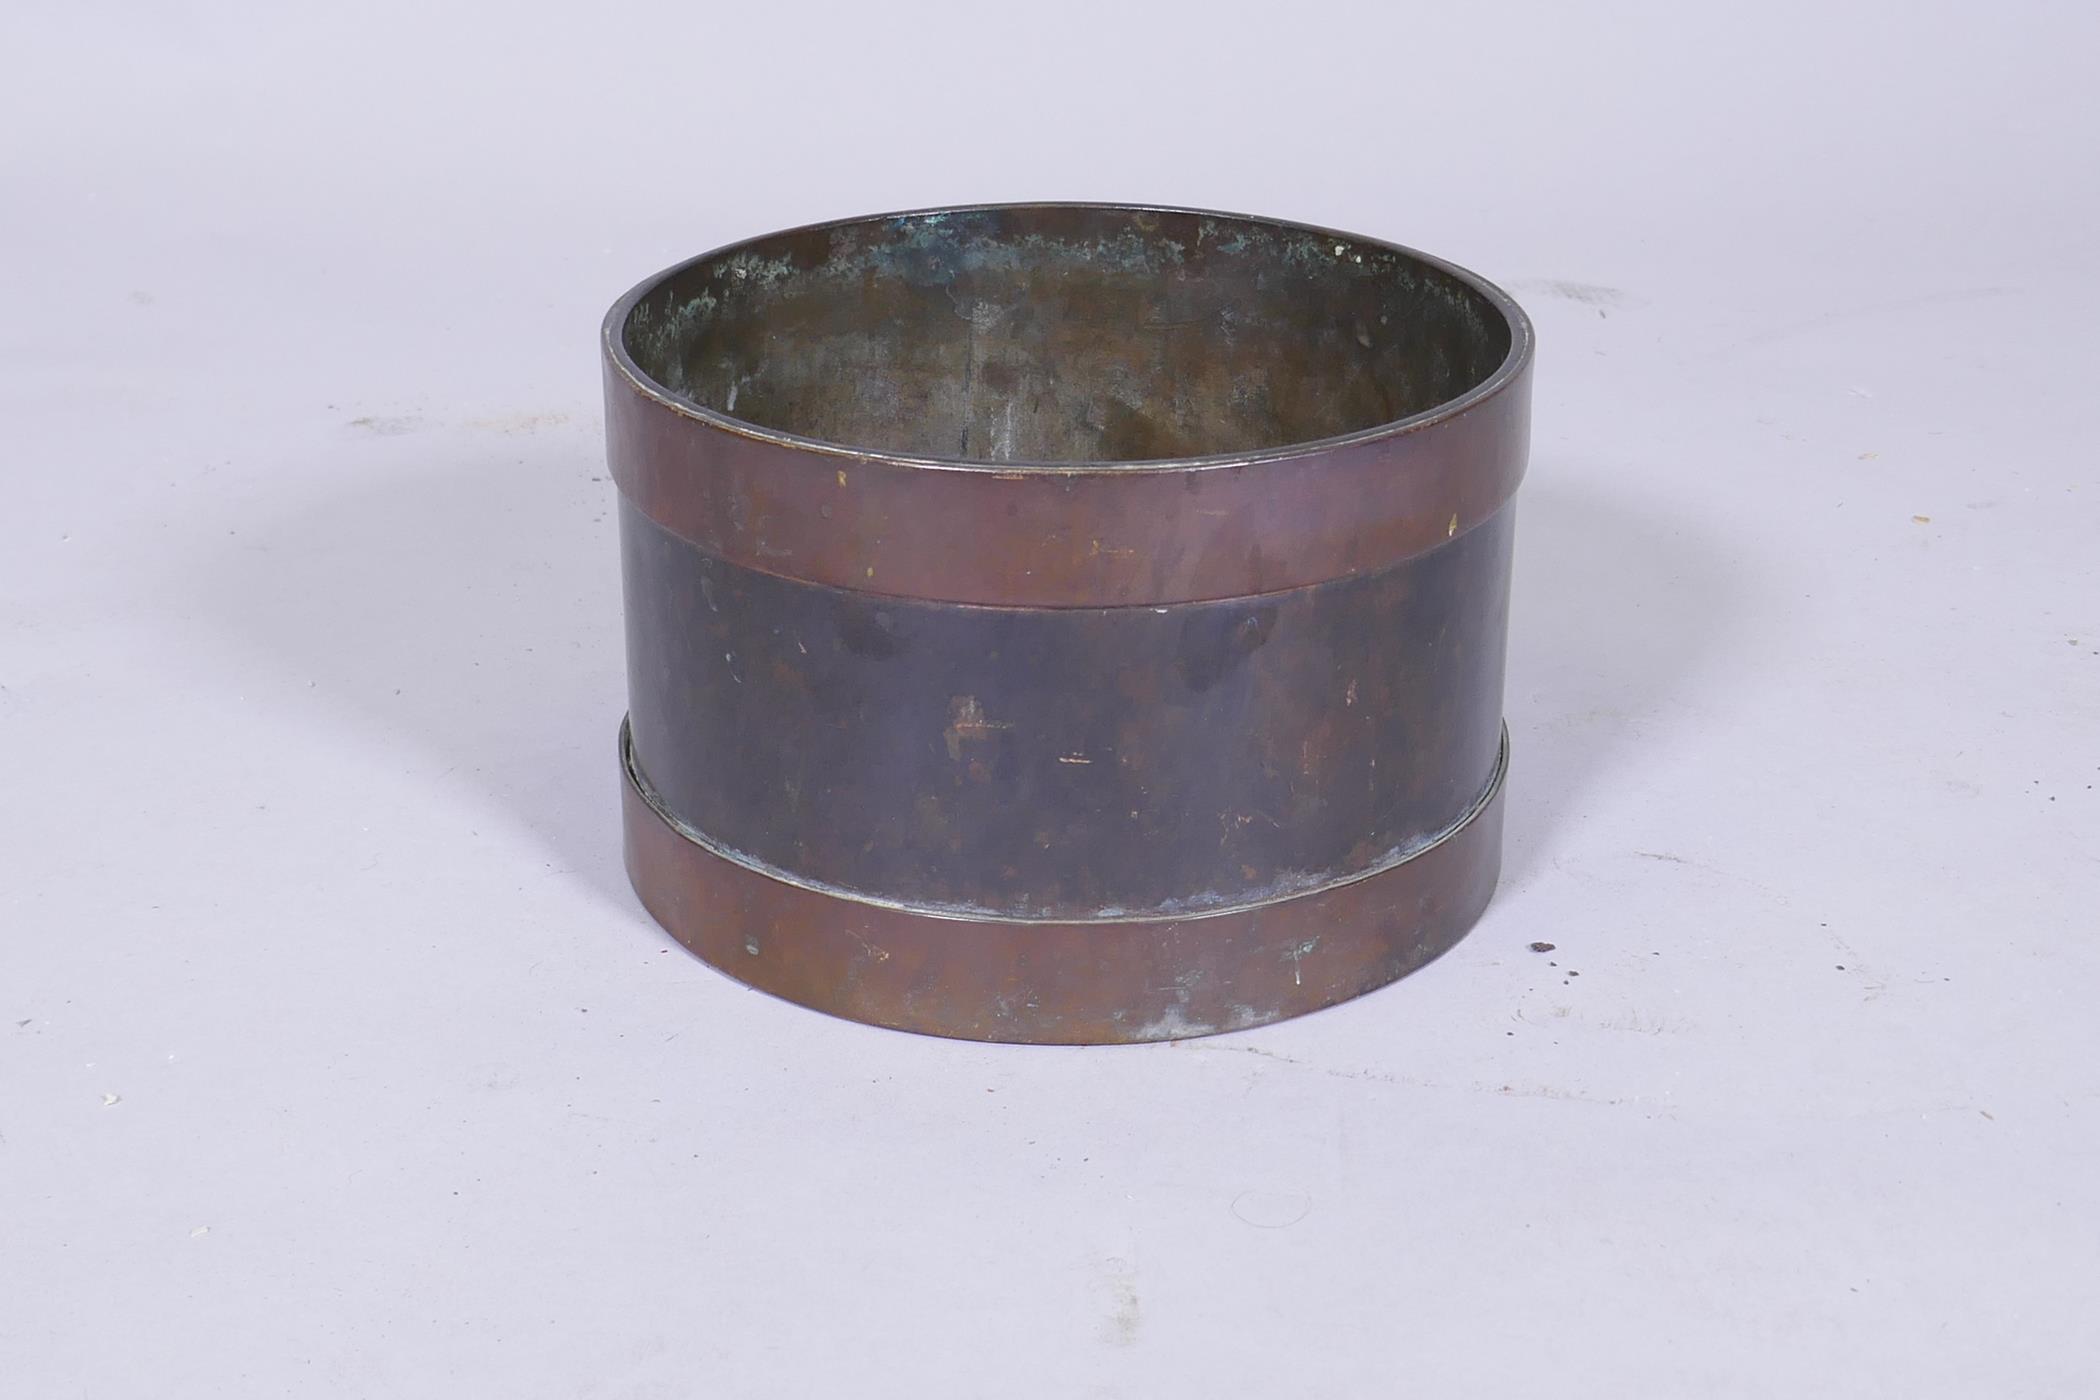 A C19th bronze and copper pot/planter with good patination, 19cm diameter, 12cm high